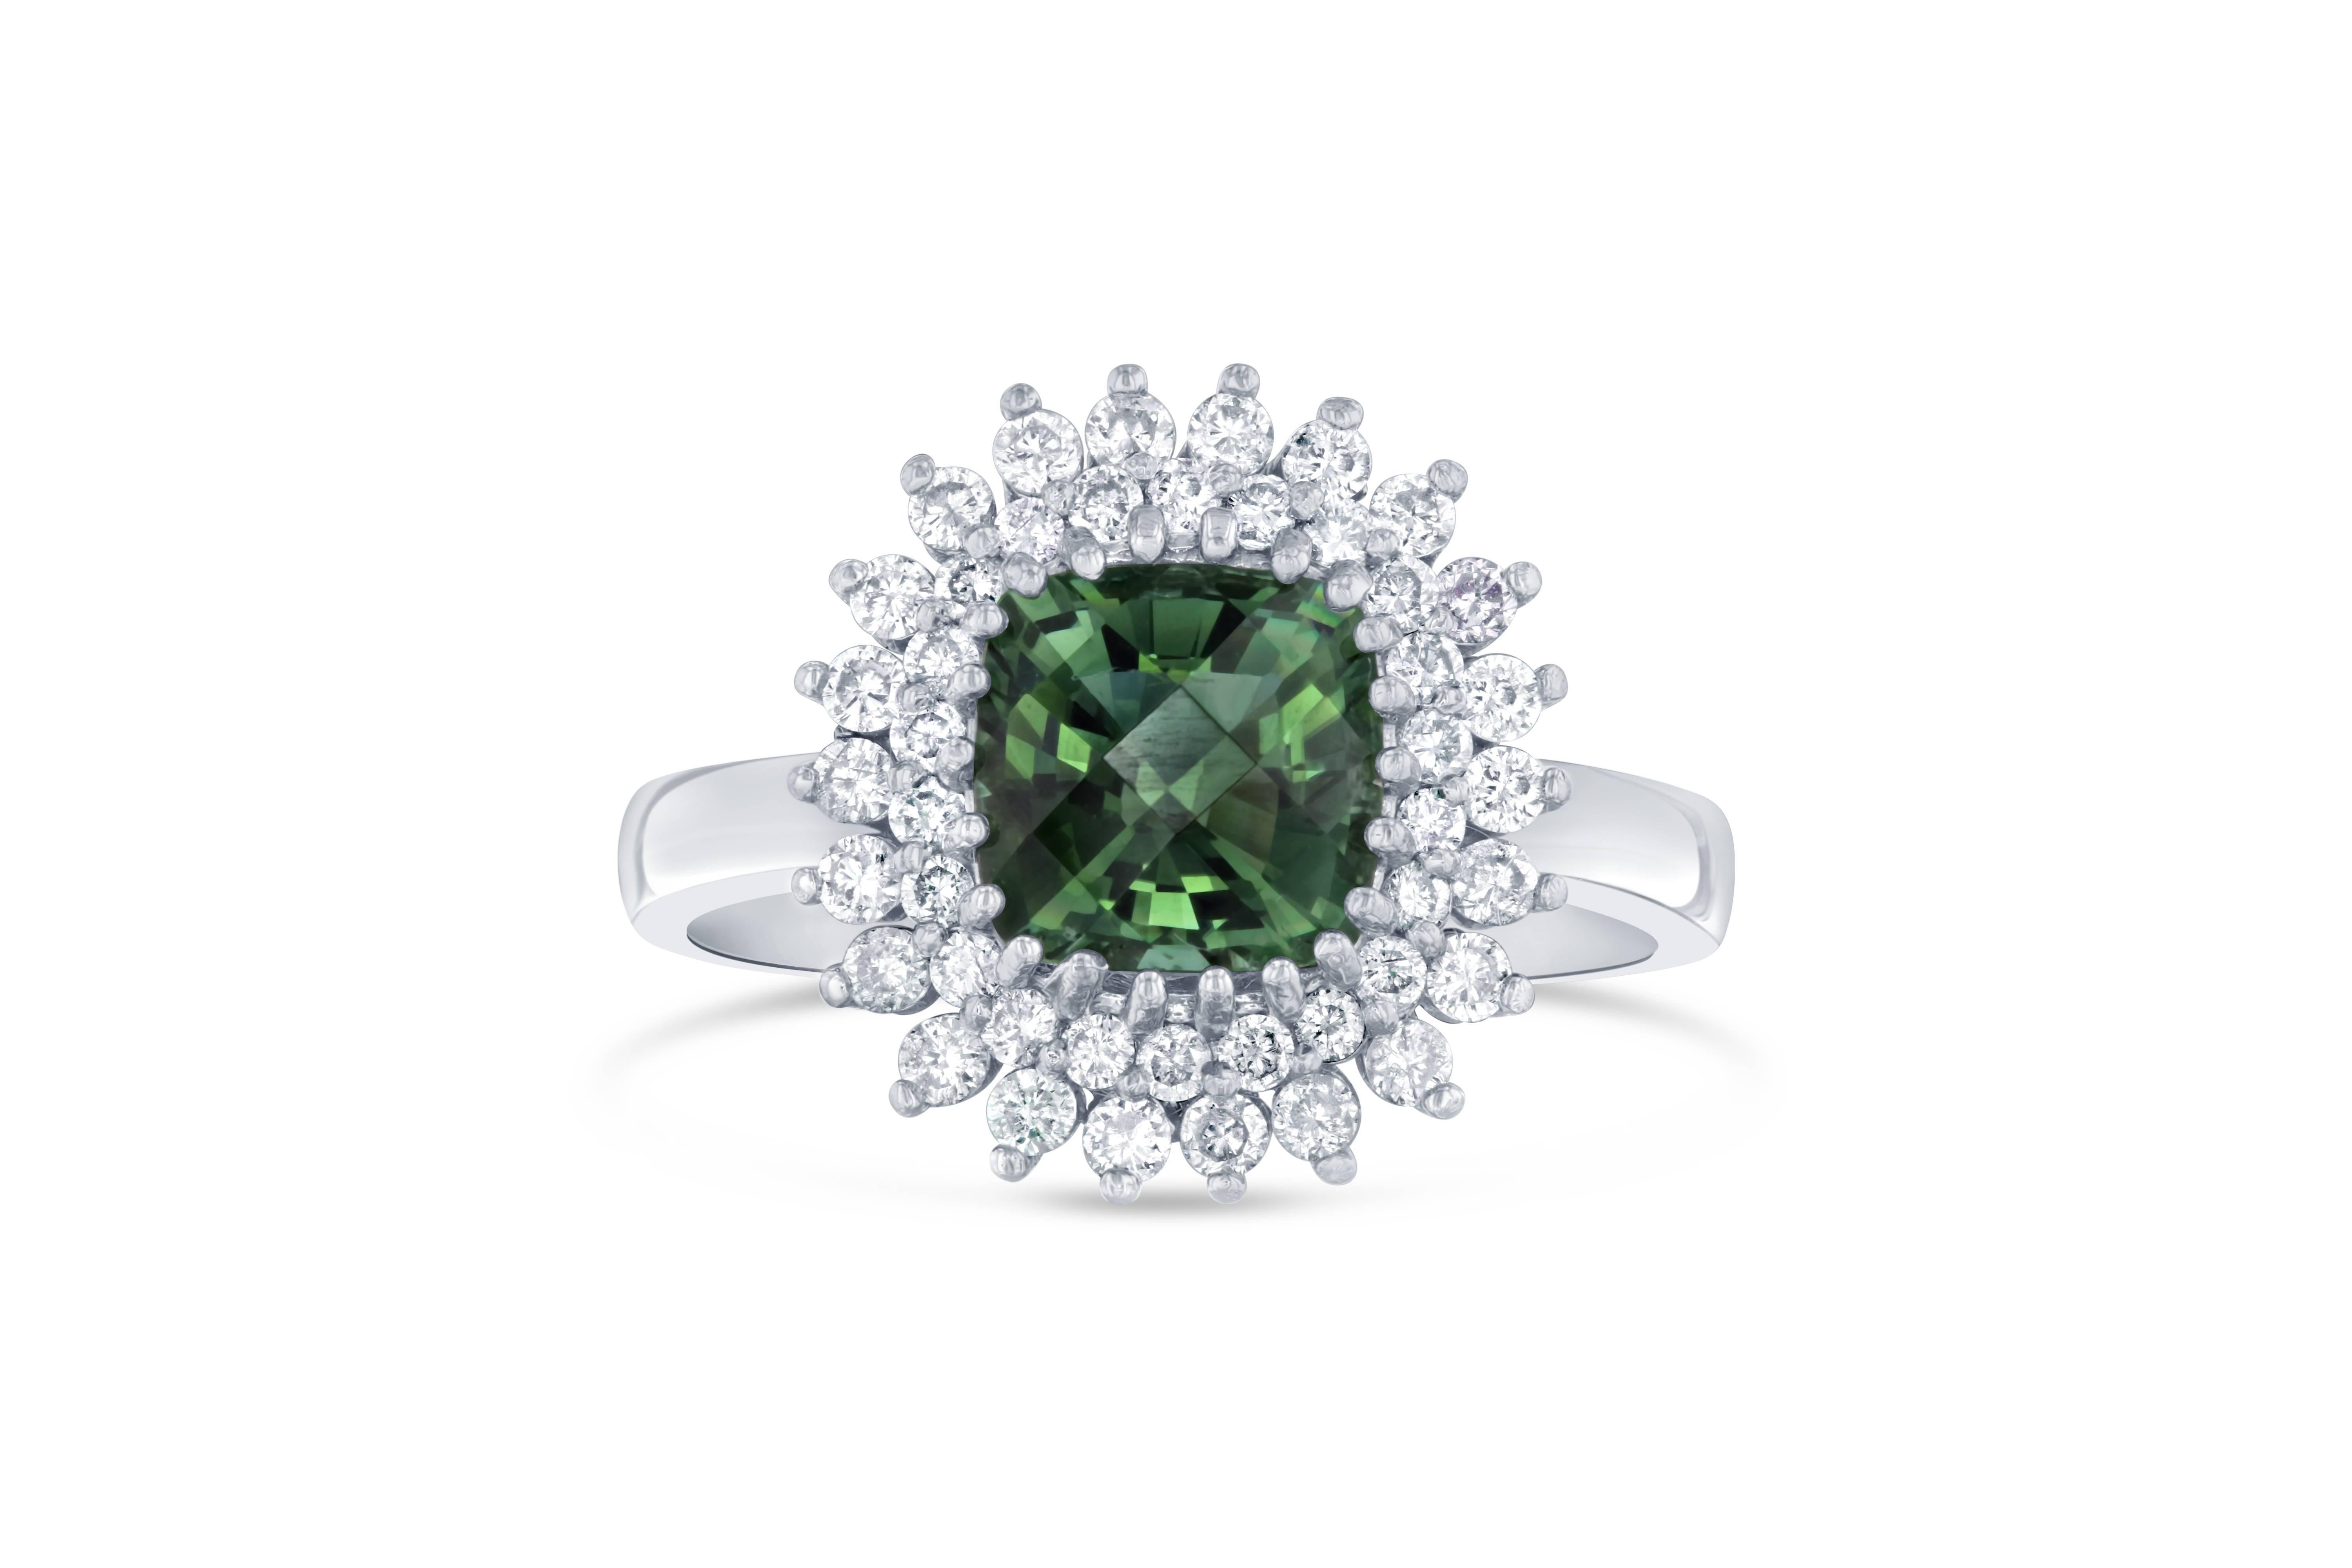 This ring has a mesmerizing Asscher cut Green Tourmaline weighing 1.67 Carats and 44 Round Cut Diamonds weighing 0.54 Carats. The total carat weight of the ring is 2.21 Carats. 
It is set in 14K White Gold and weighs approximately 4.5 grams. 
The